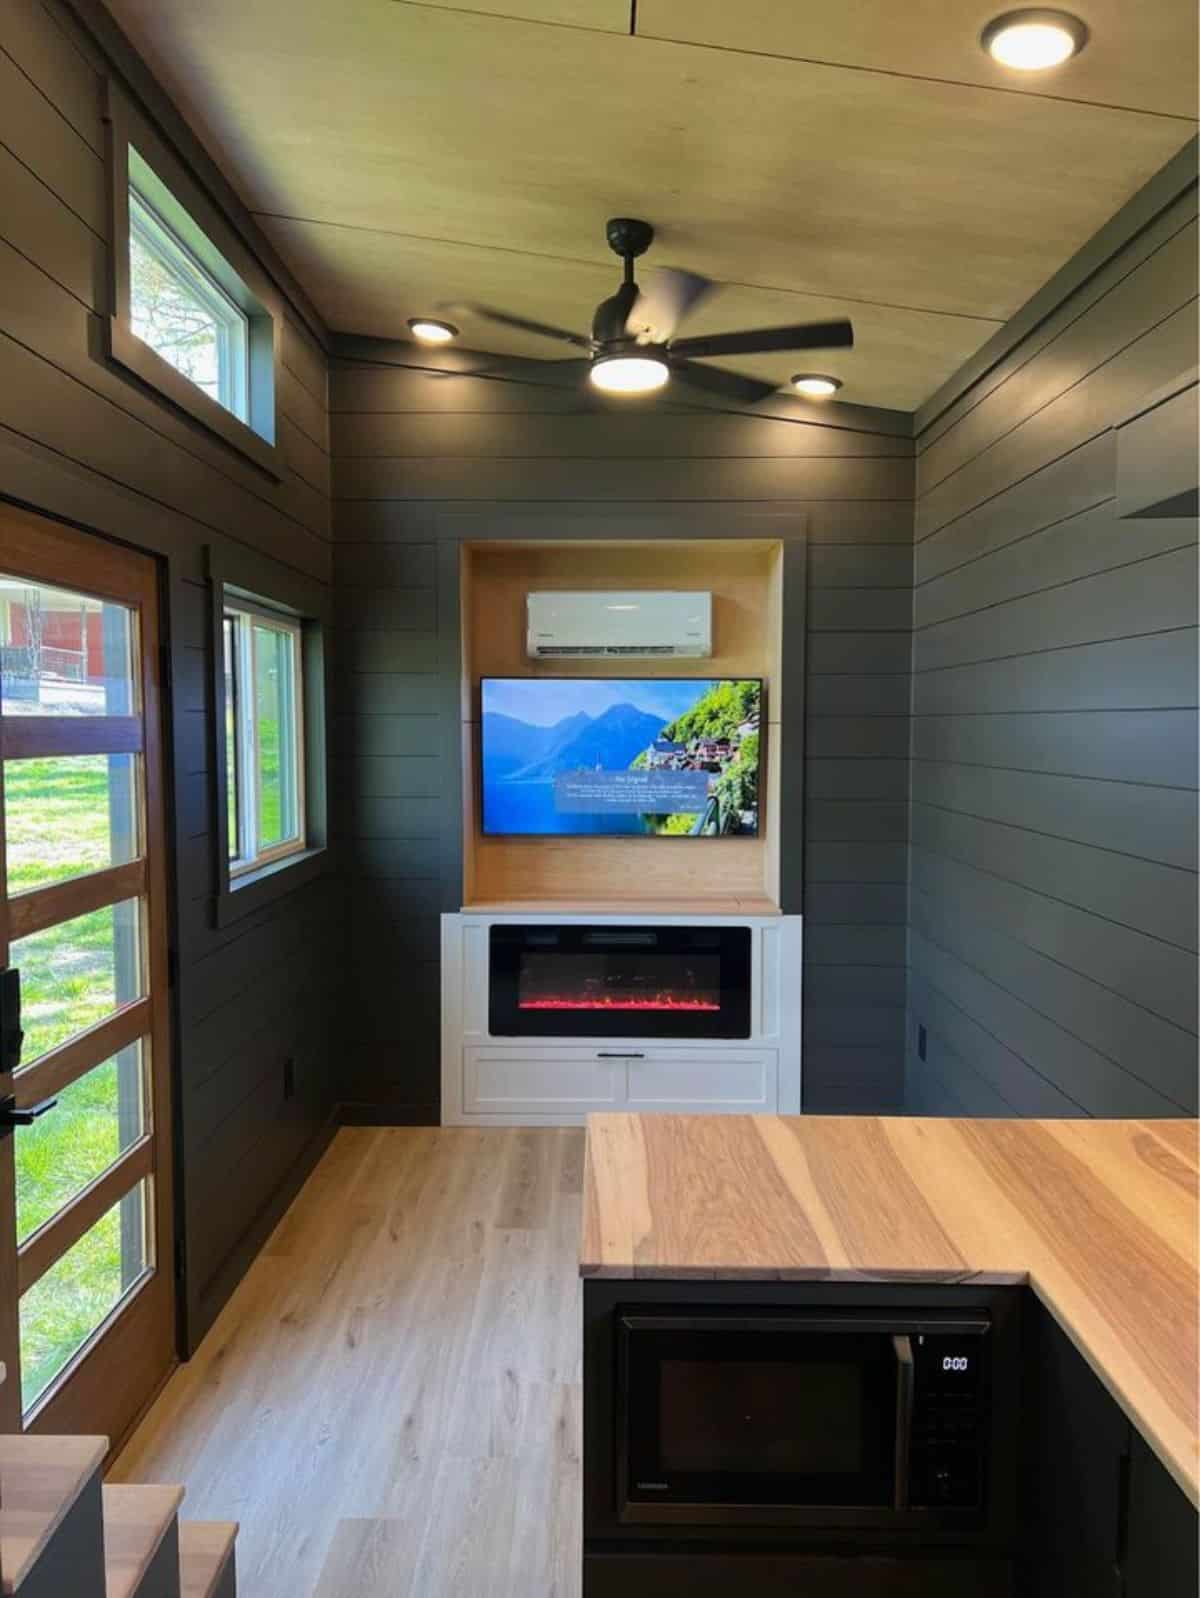 wall mounted TV and fireplace in the living area